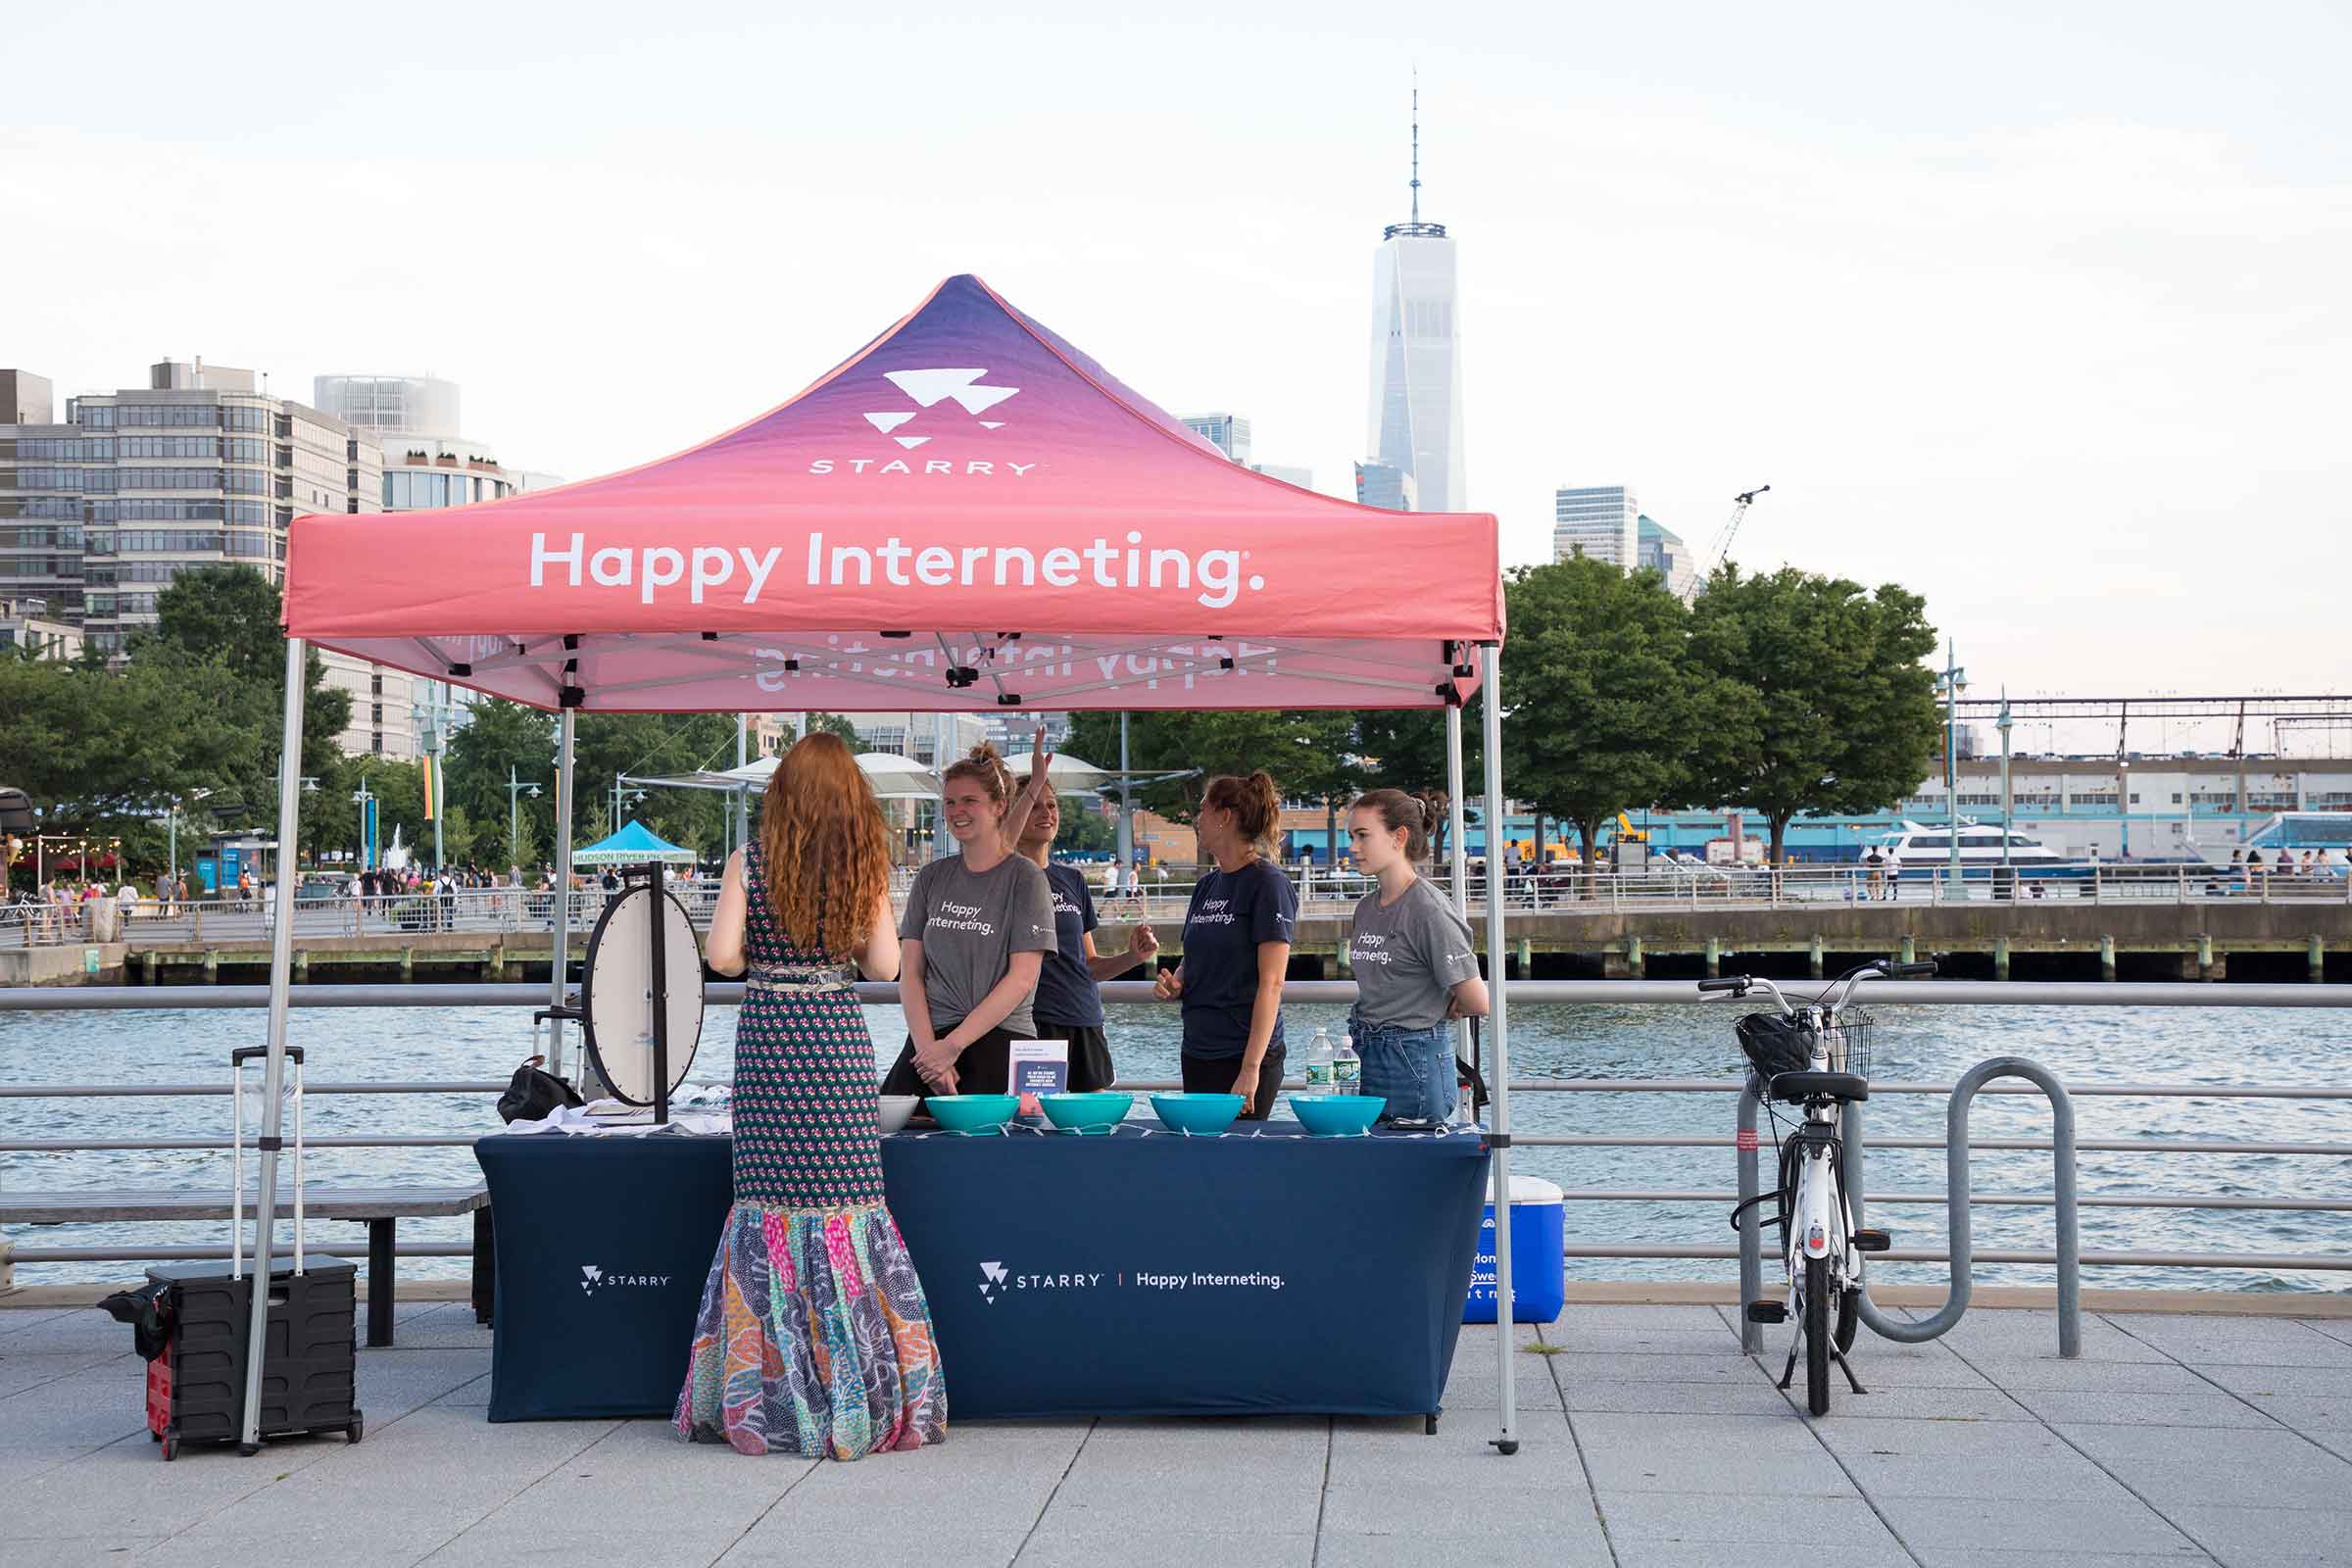 Starry, a web provider is one of the many sponsors for Hudson River Park